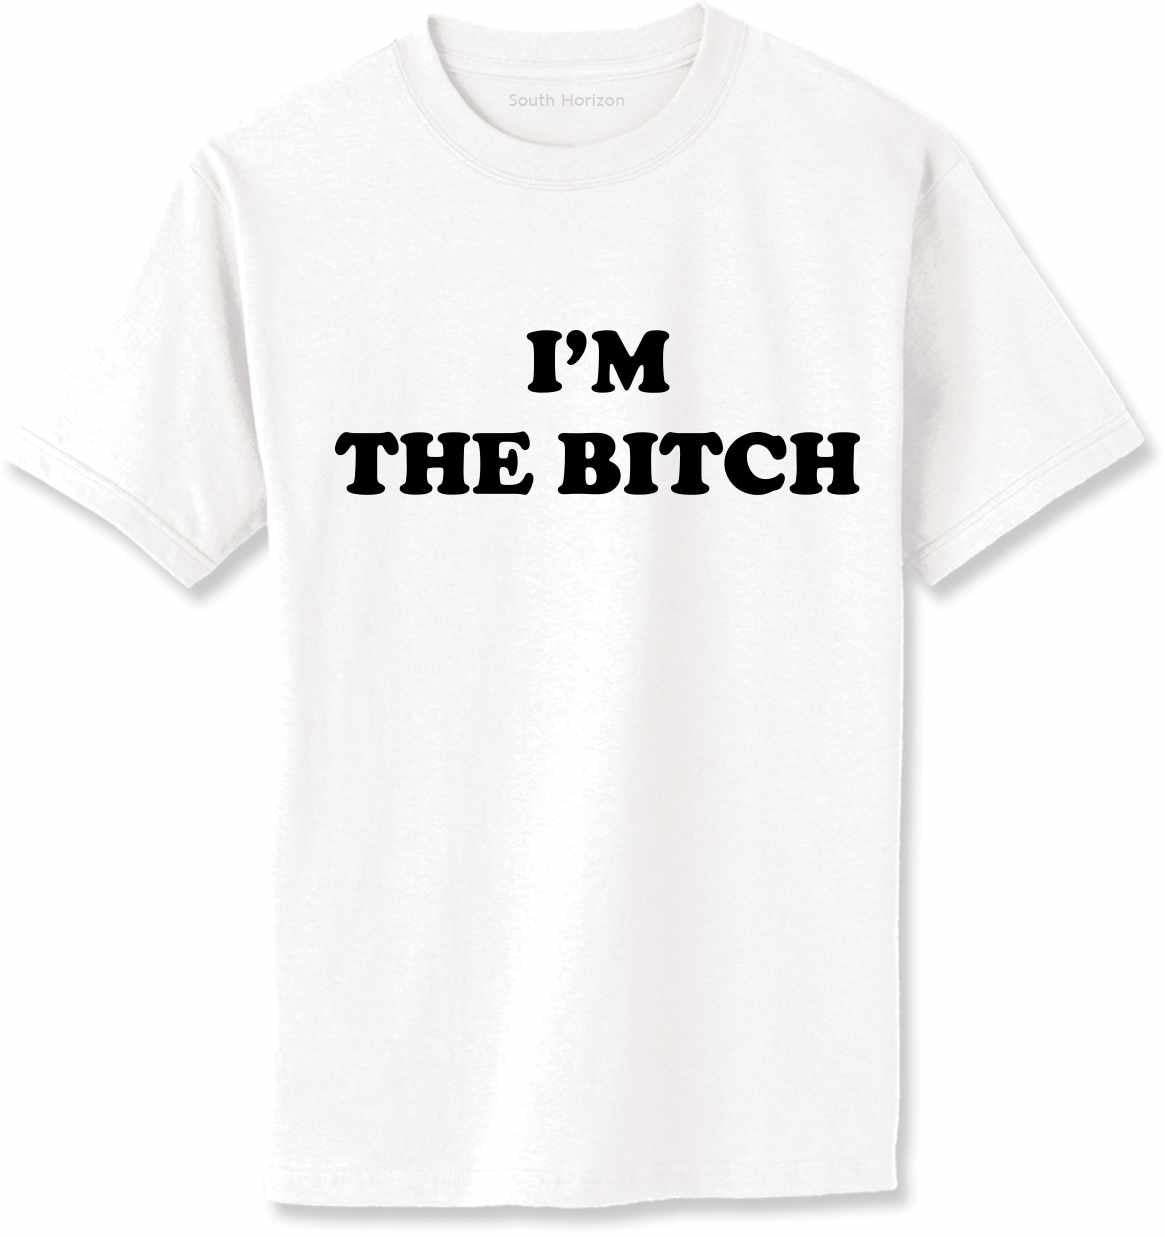 I'M THE BITCH on Adult T-Shirt (#1394-1)